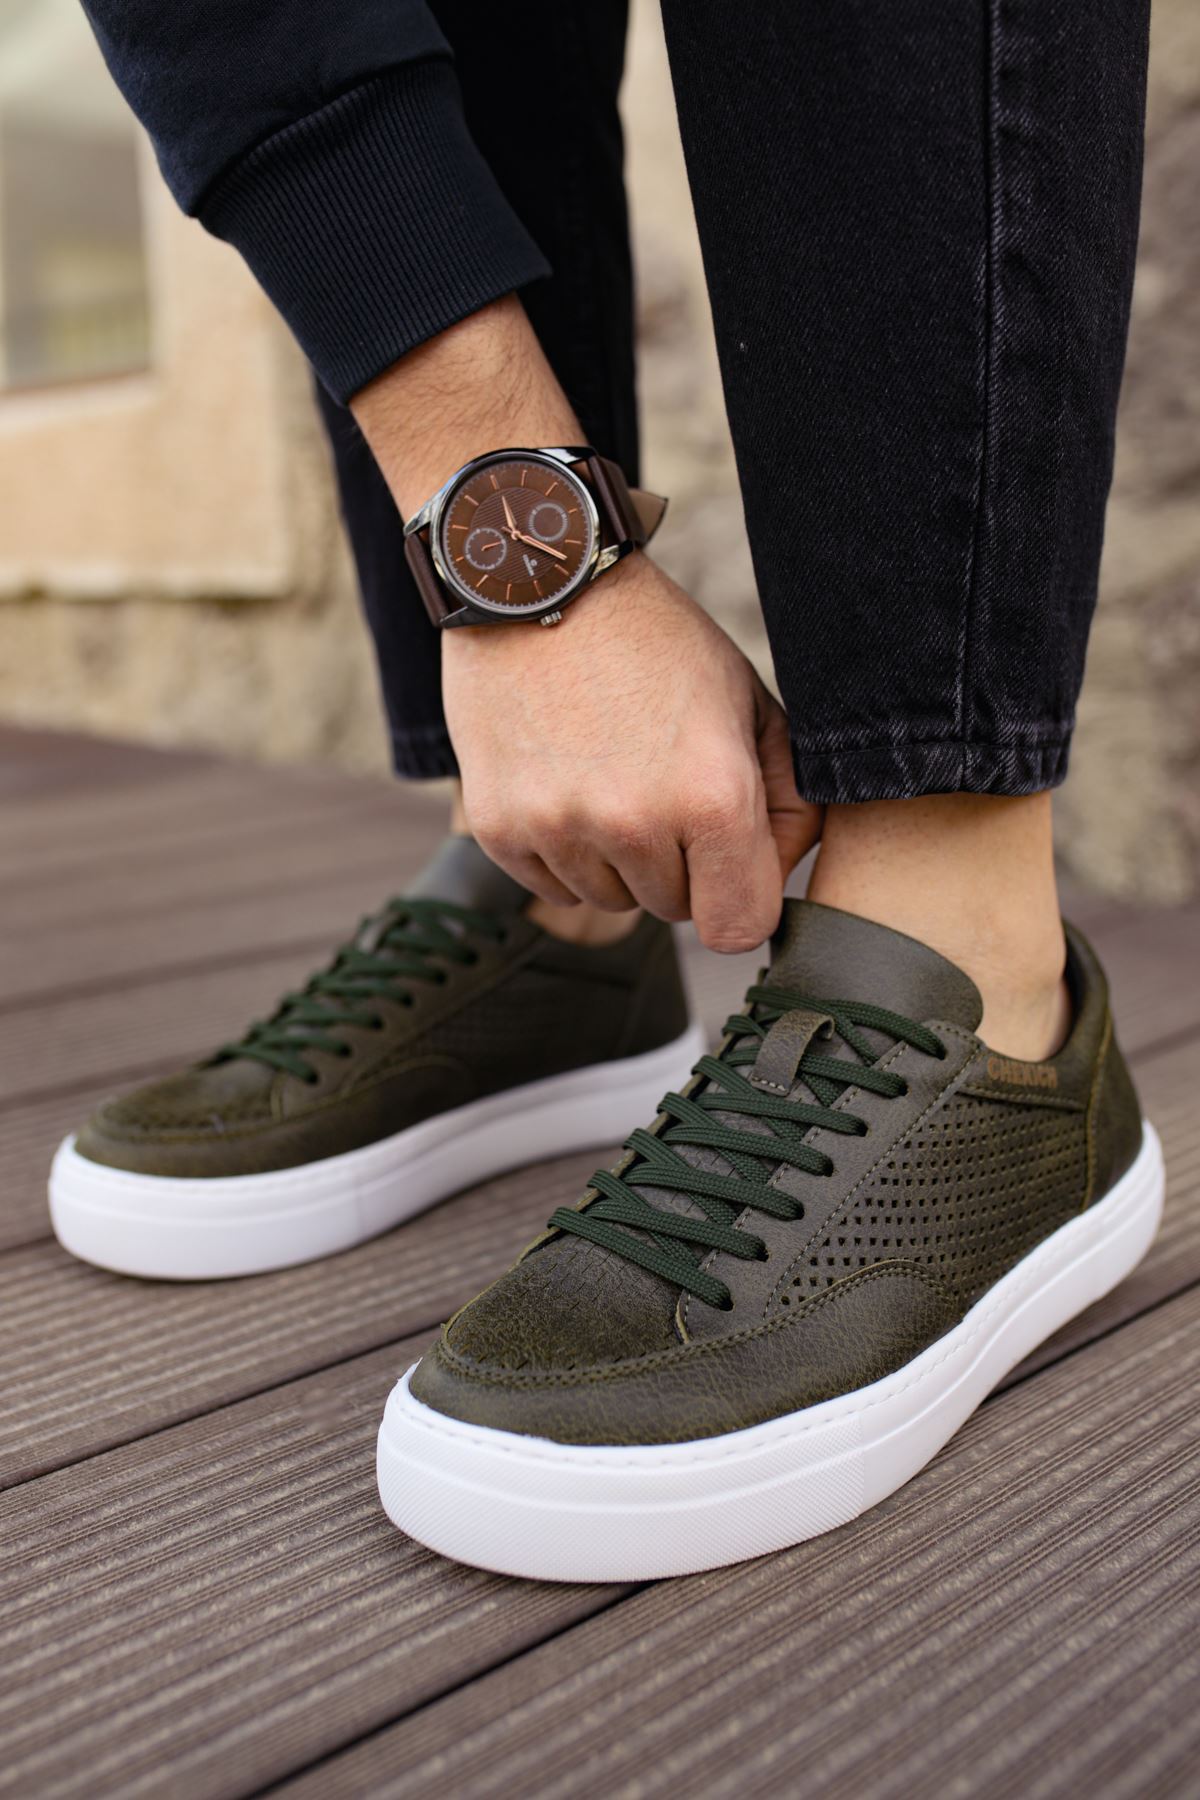 Chekich Men's Anthracite Sneakers Non-Leather Spring and Fall Season Casual Shoes Wedding Vulcanized Sewing Outsole Lightweight Odorless Walking Sport Breathable Flats New Arrival Suits CH015 V1